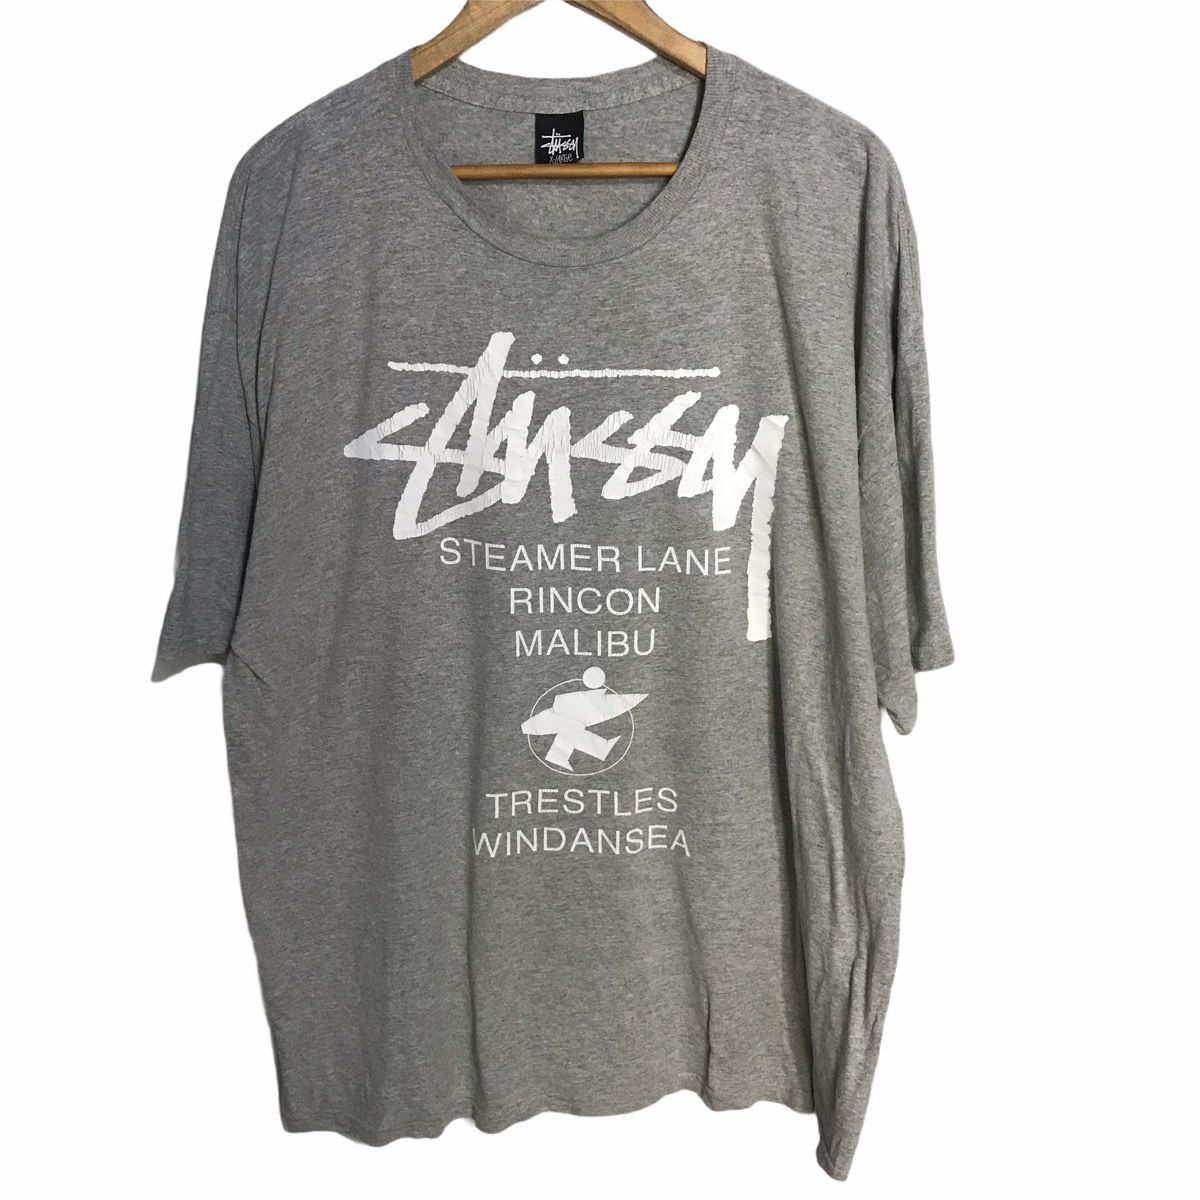 Vintage Stussy big spell tshirt made in mexico x large size - 1